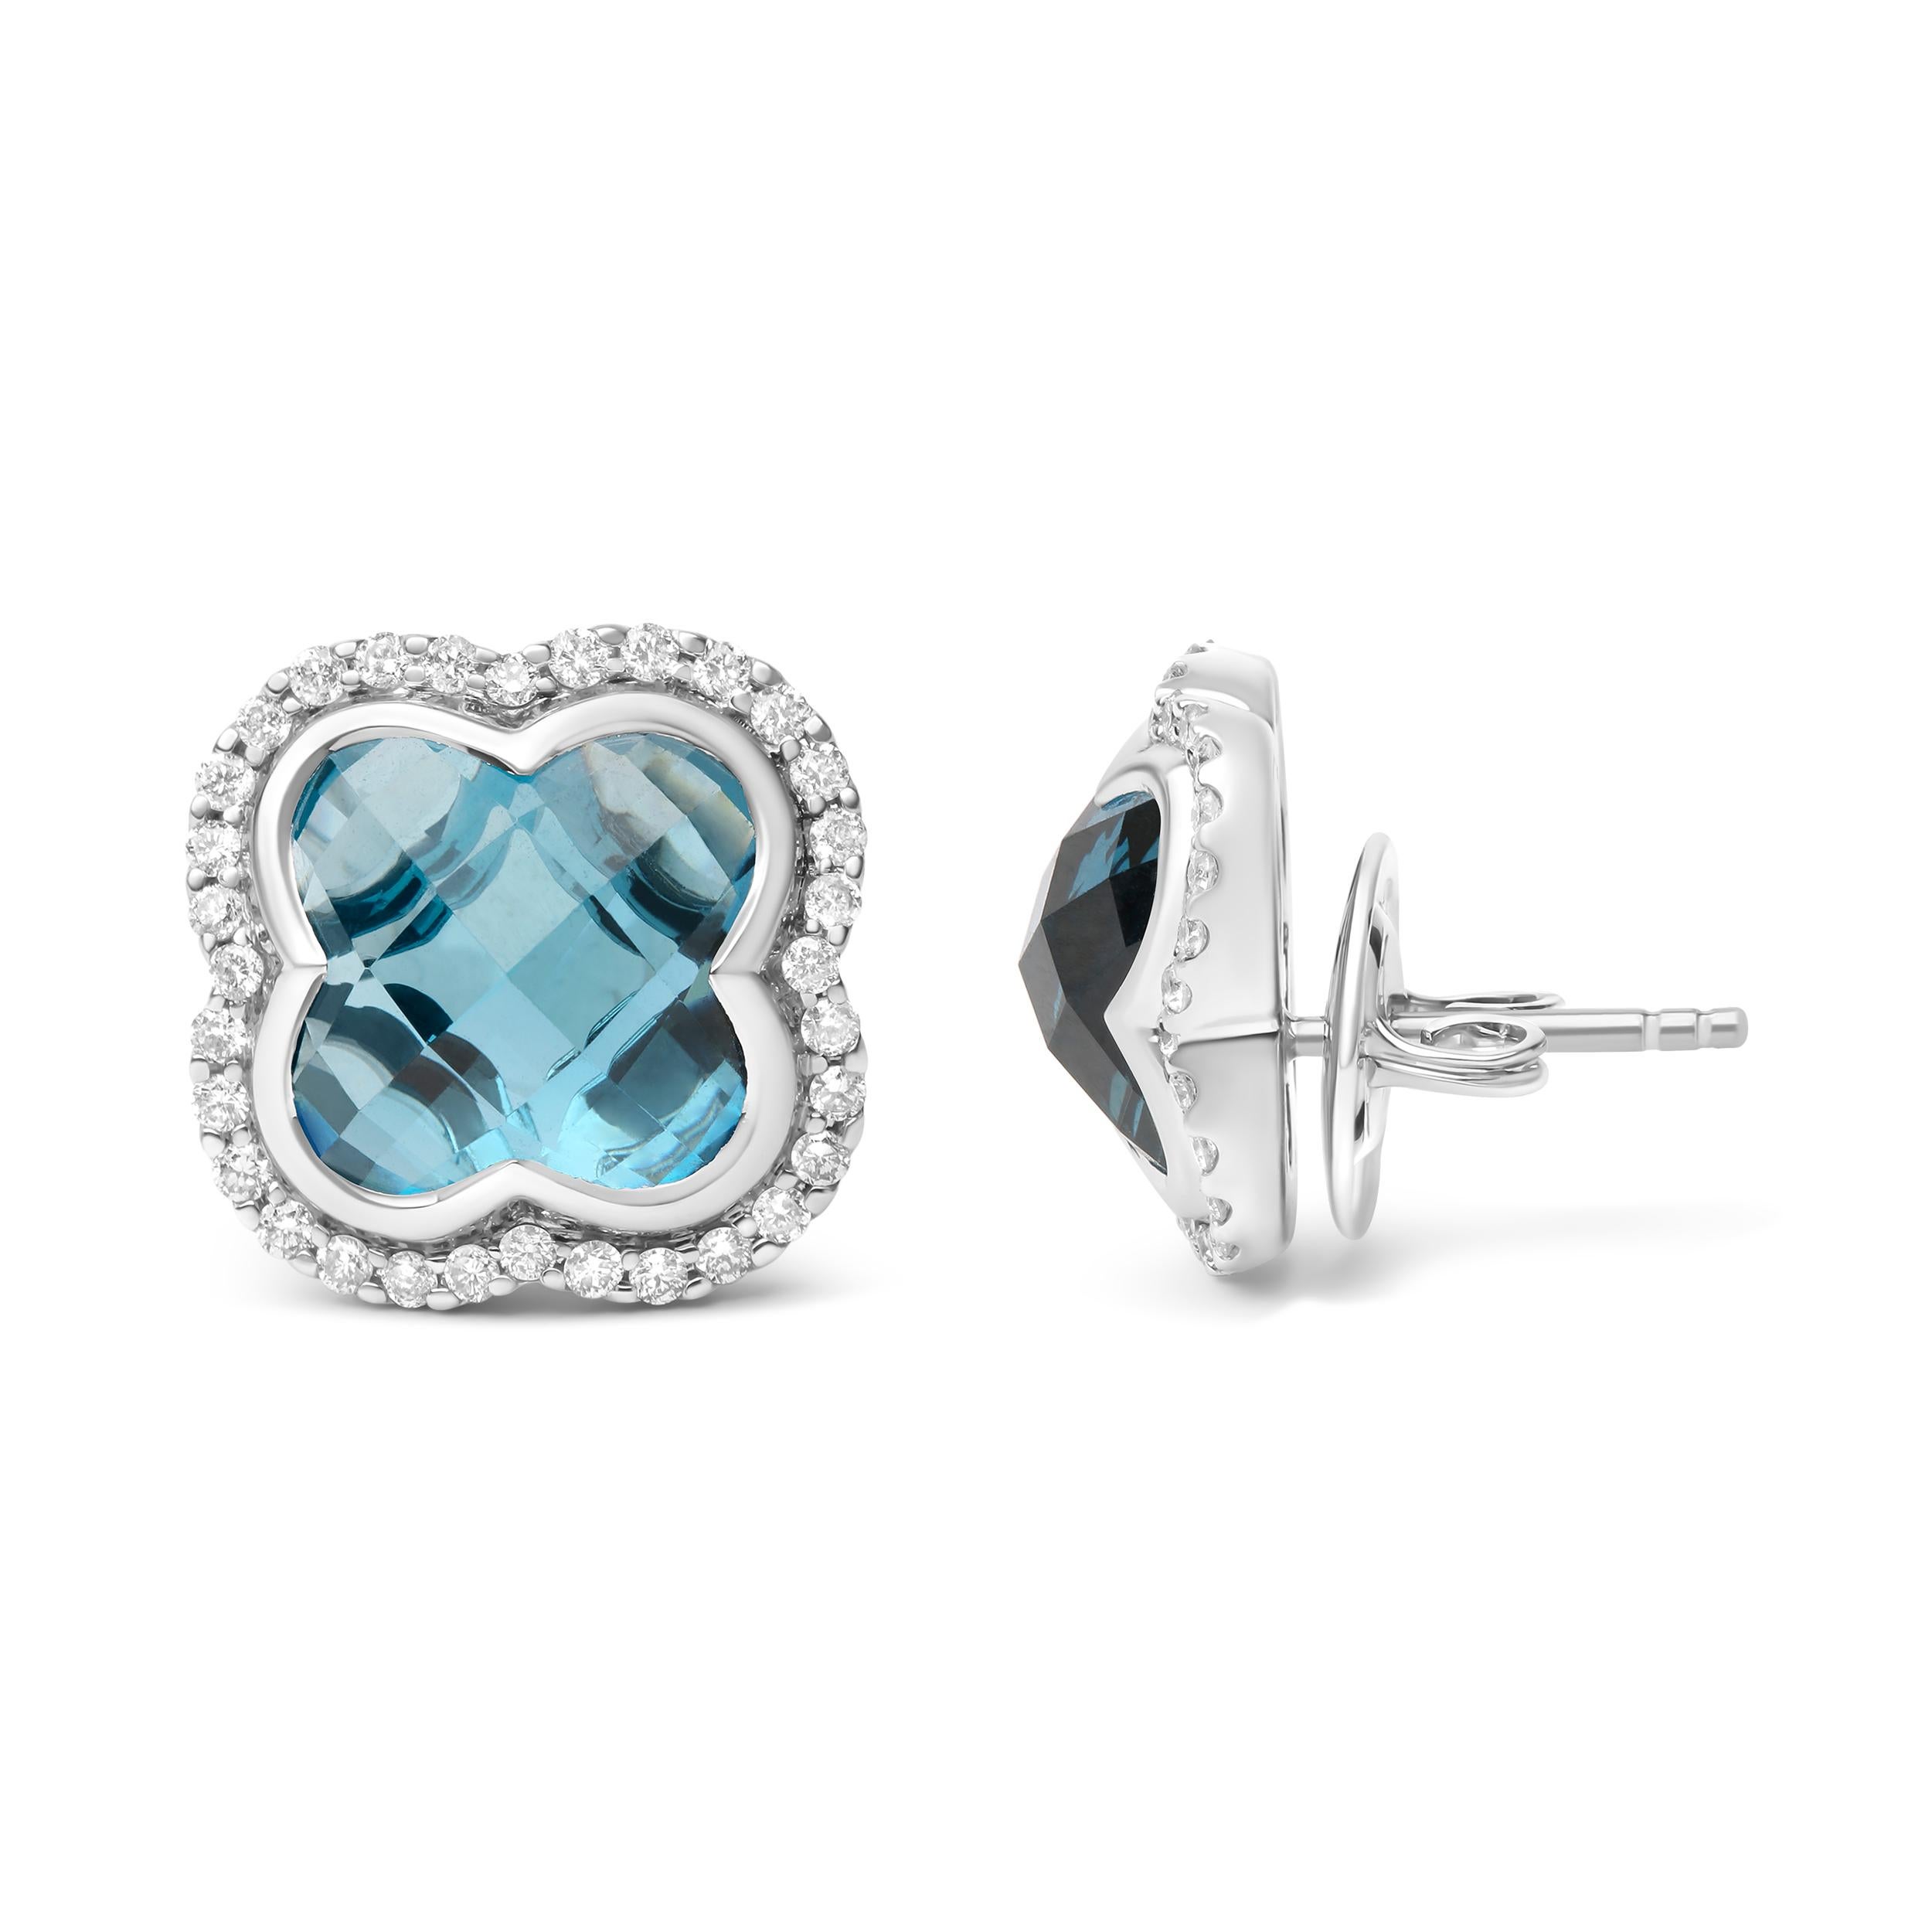 Contemporary 18K White Gold 3/8 Carat Diamond and Blue Topaz Gemstone Halo Stud Earrings For Sale